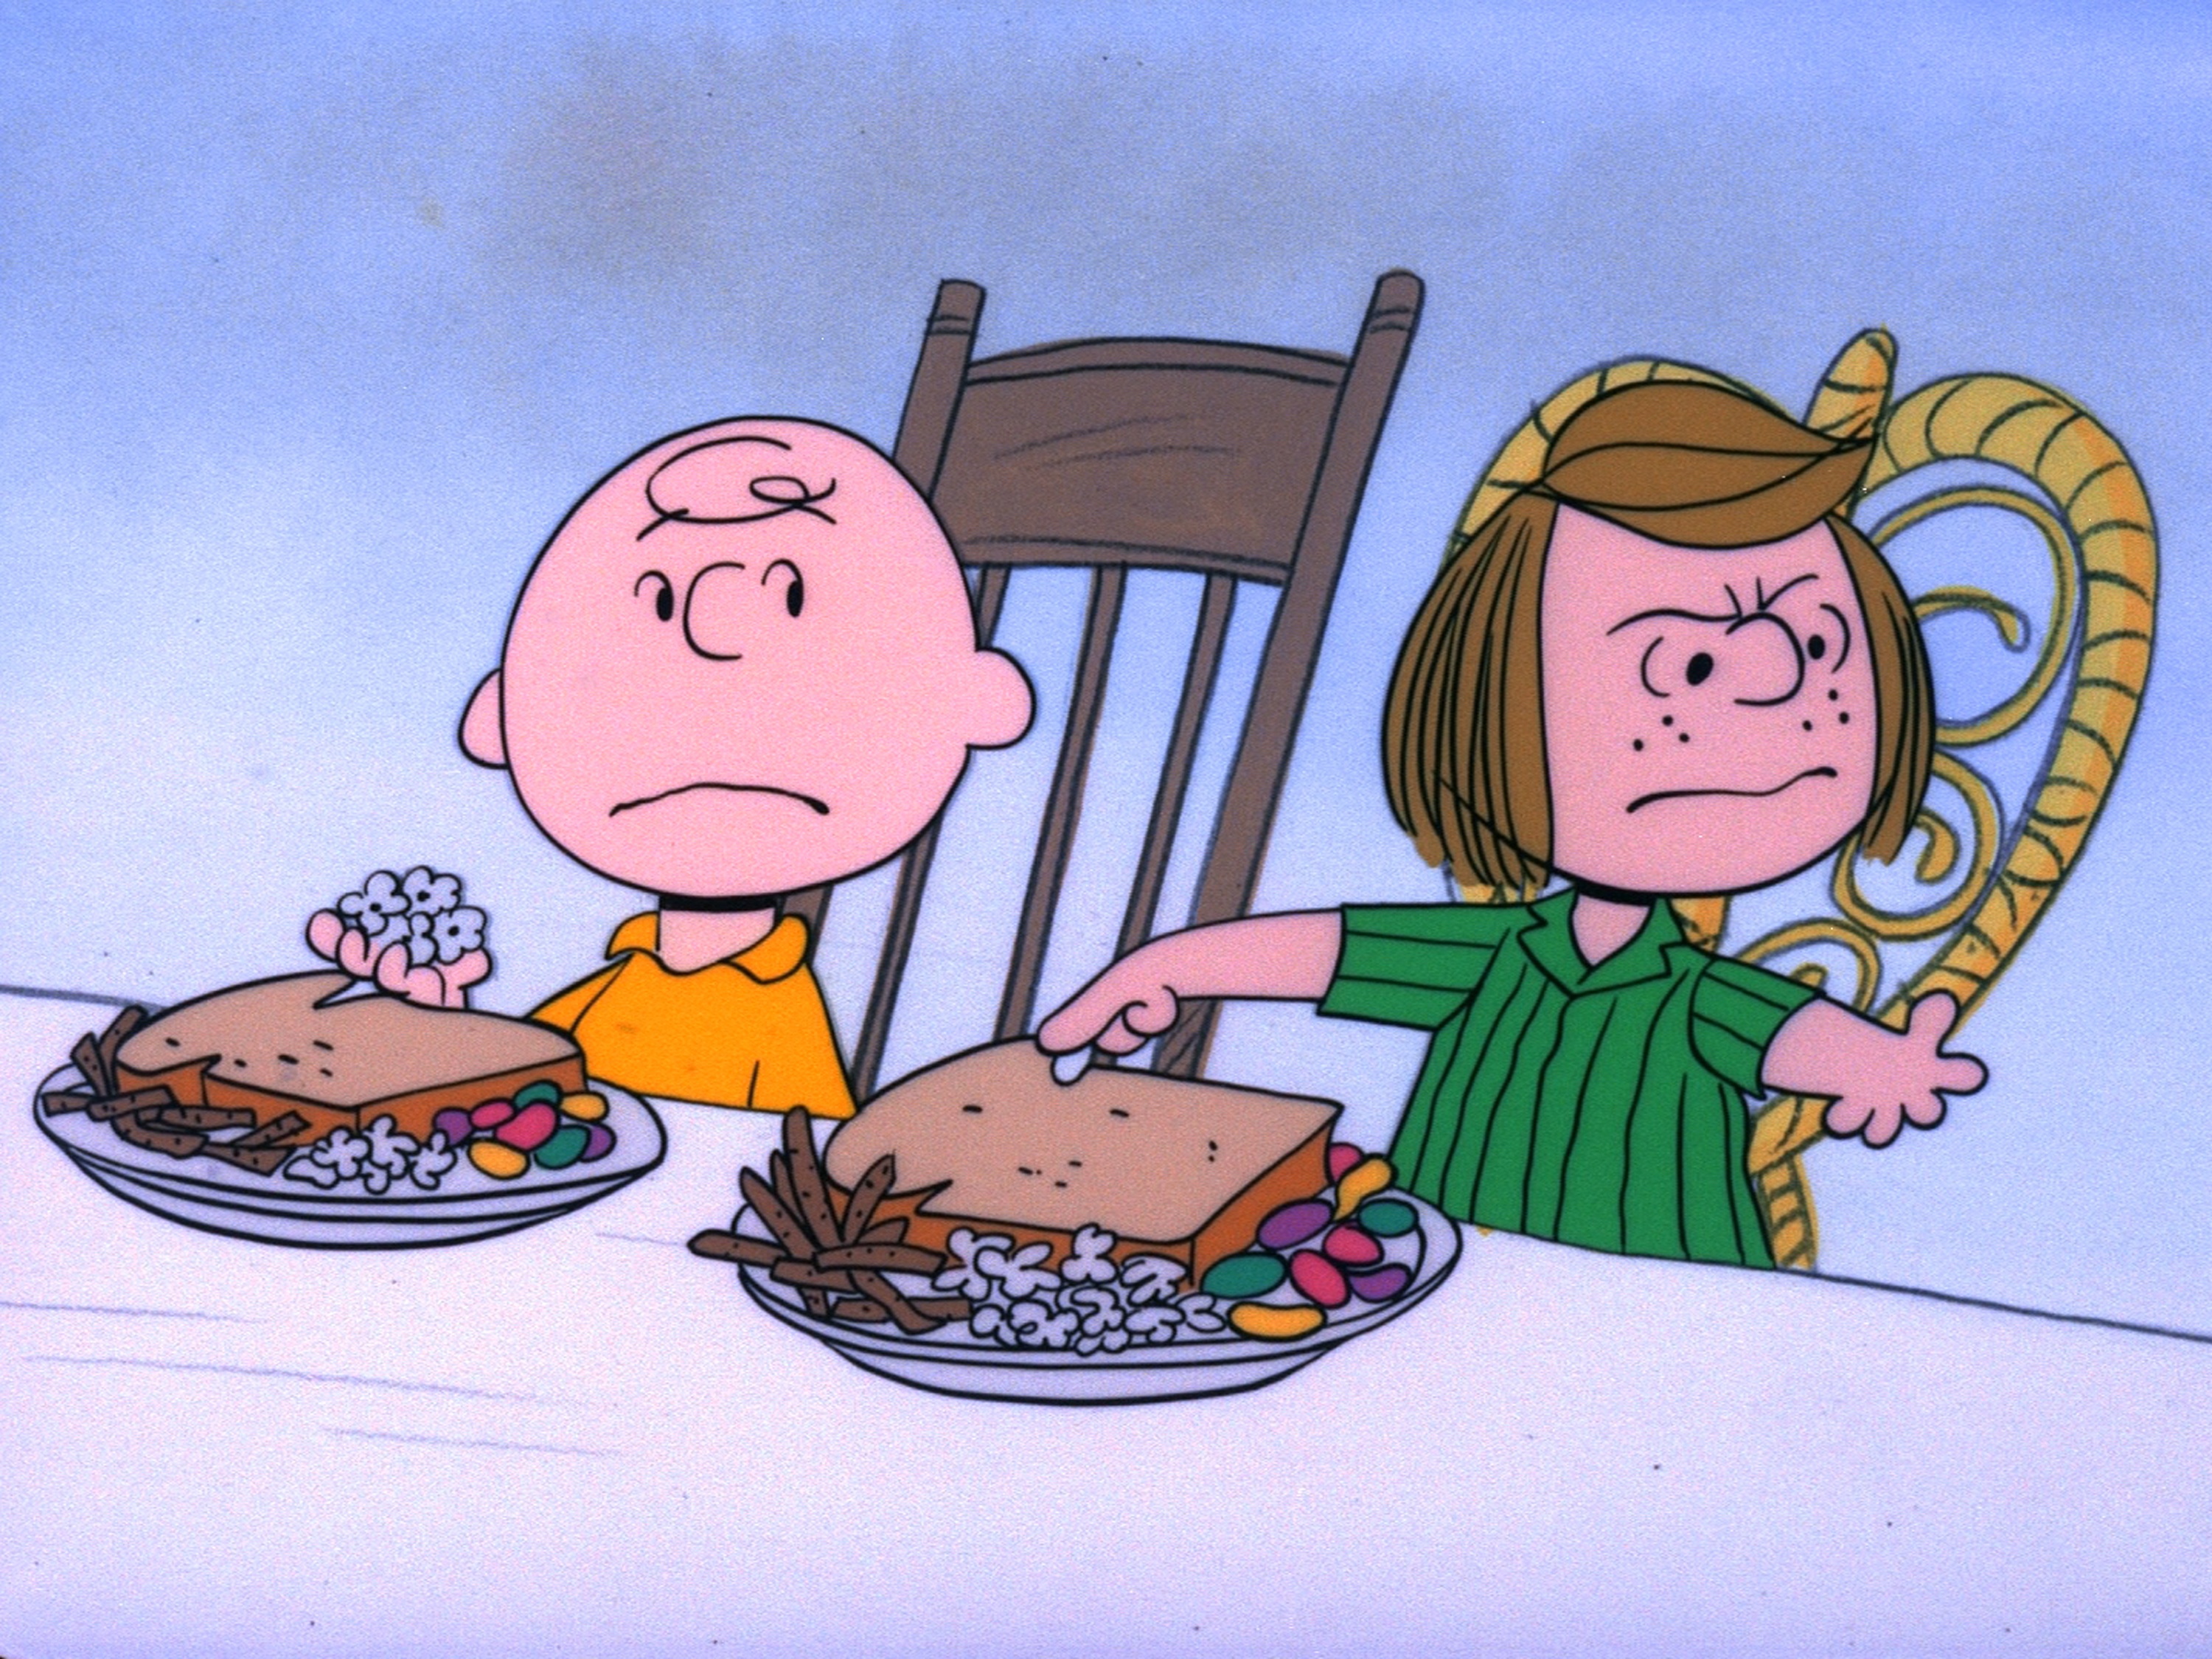 Charlie Brown and Peppermint Patty